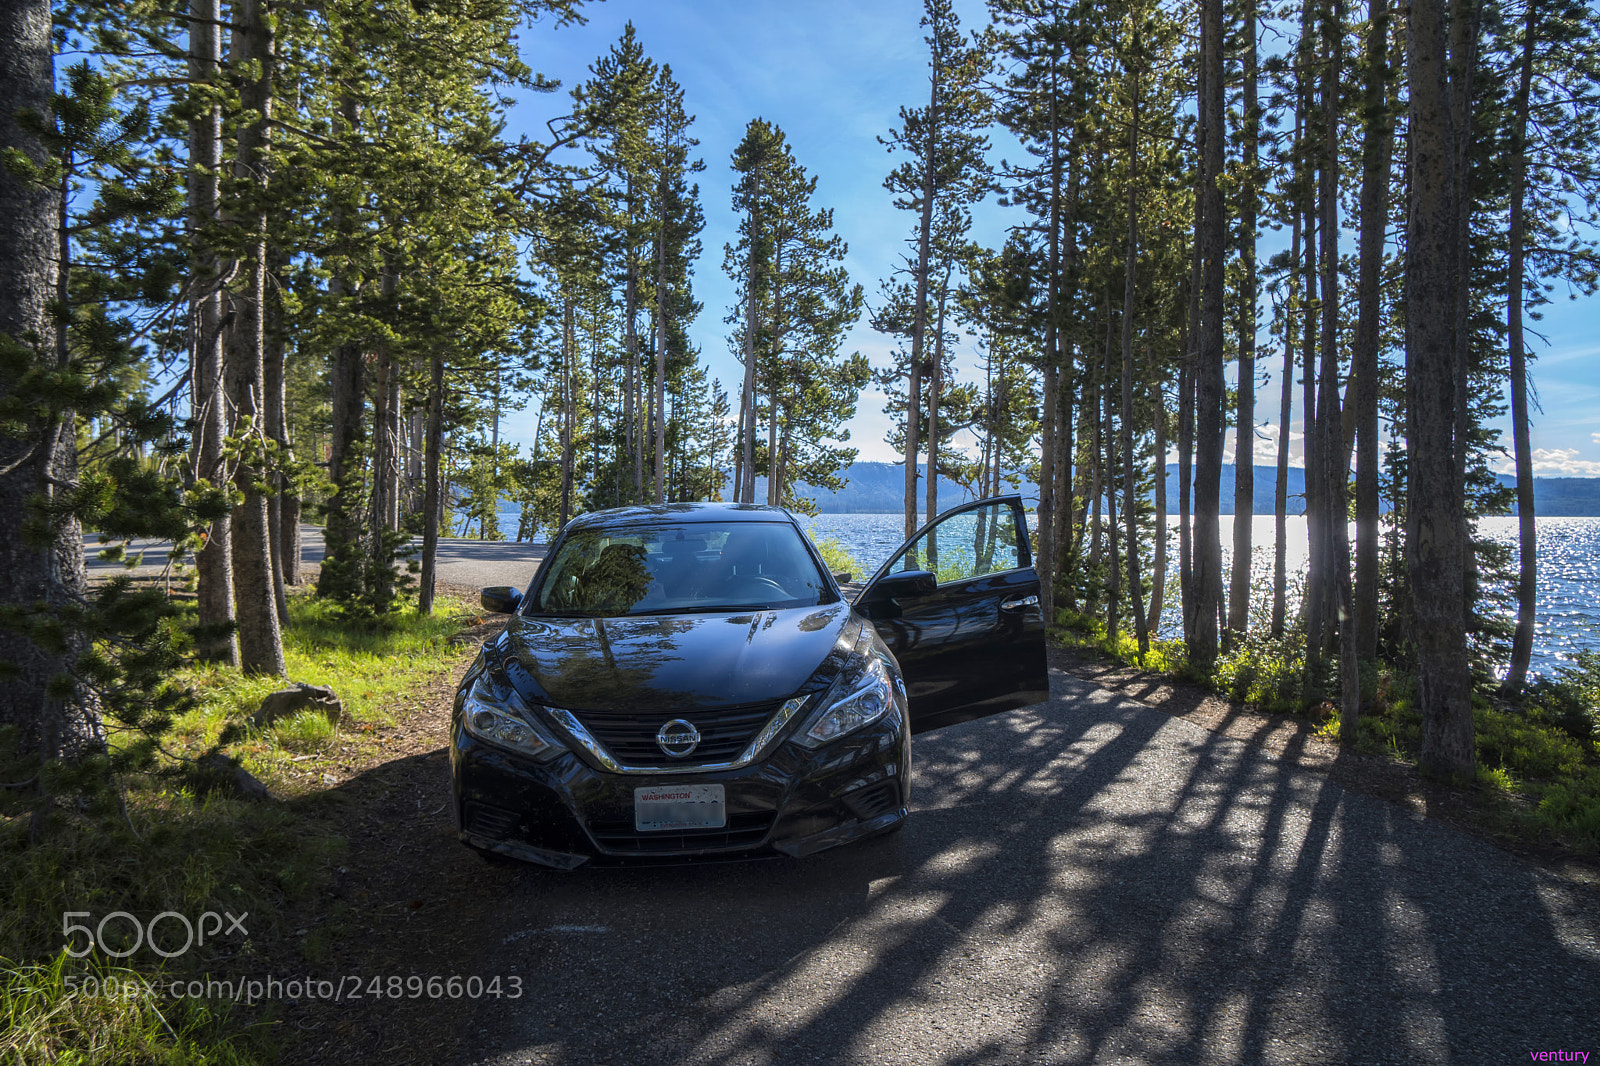 Sony a6500 sample photo. My car in yellowstone photography